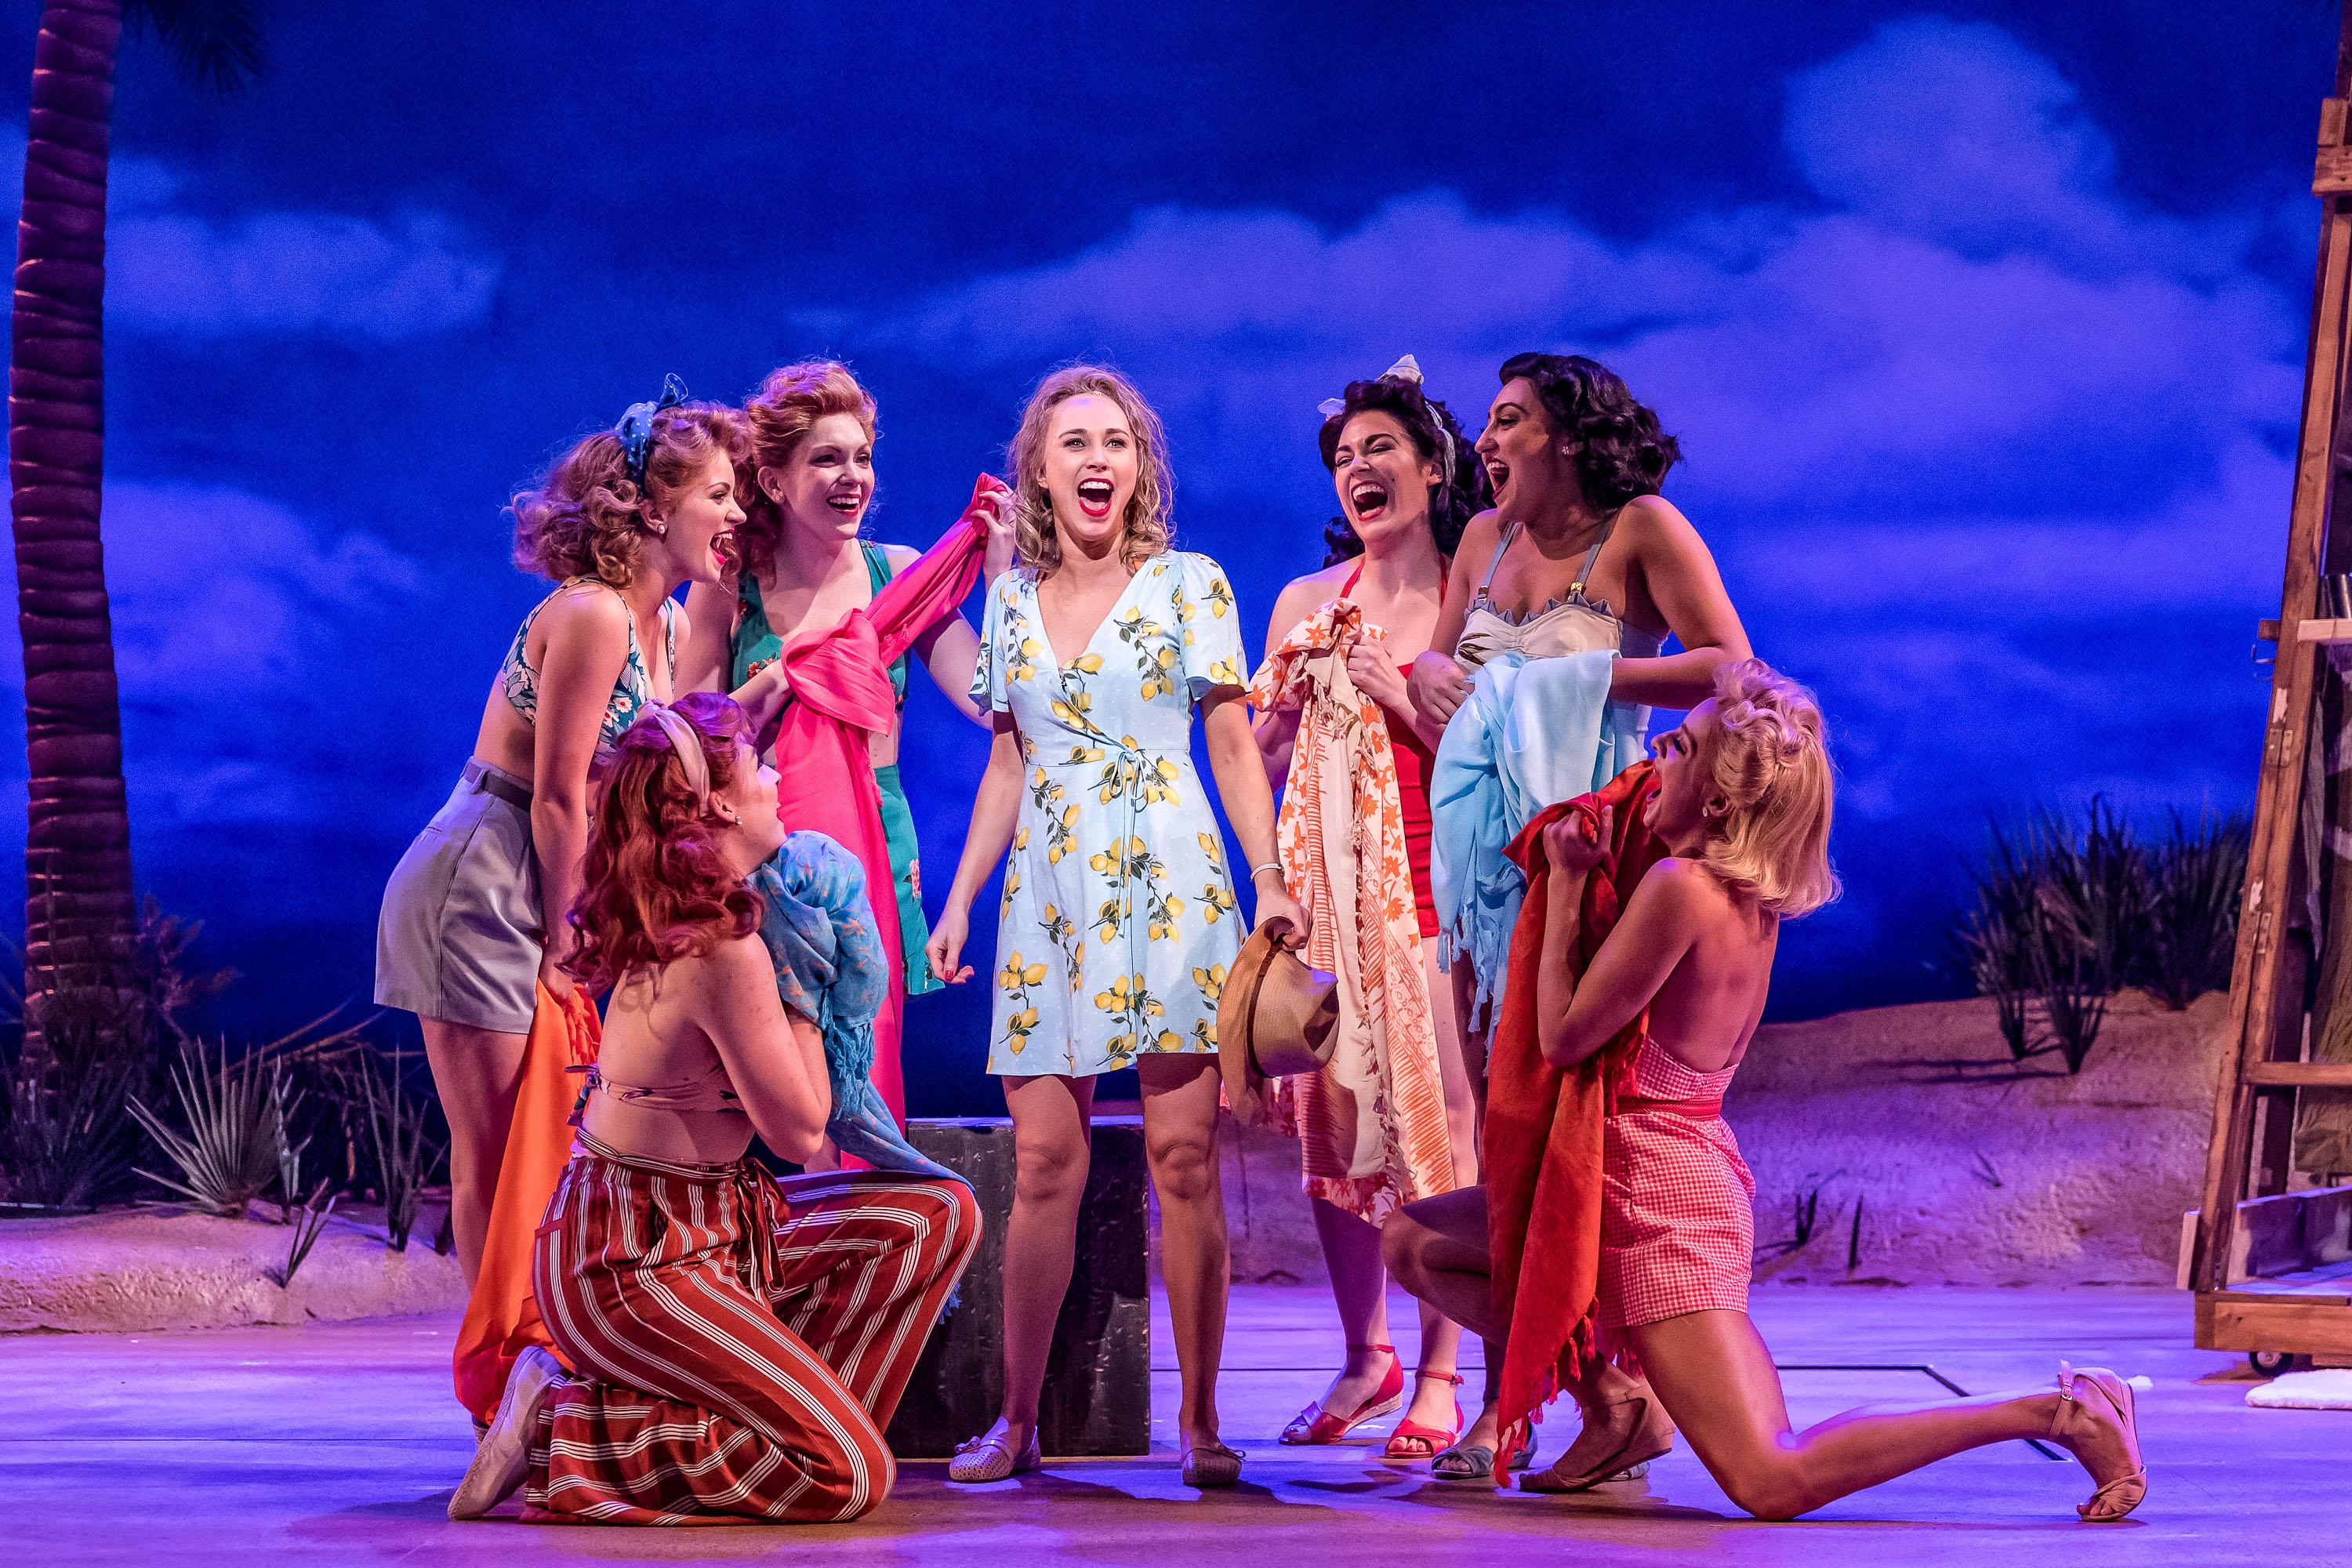 Samantha Hill, center, as Nellie in “South Pacific” at Drury Lane Oakbrook Theatre. (Photo by Brett Beiner)